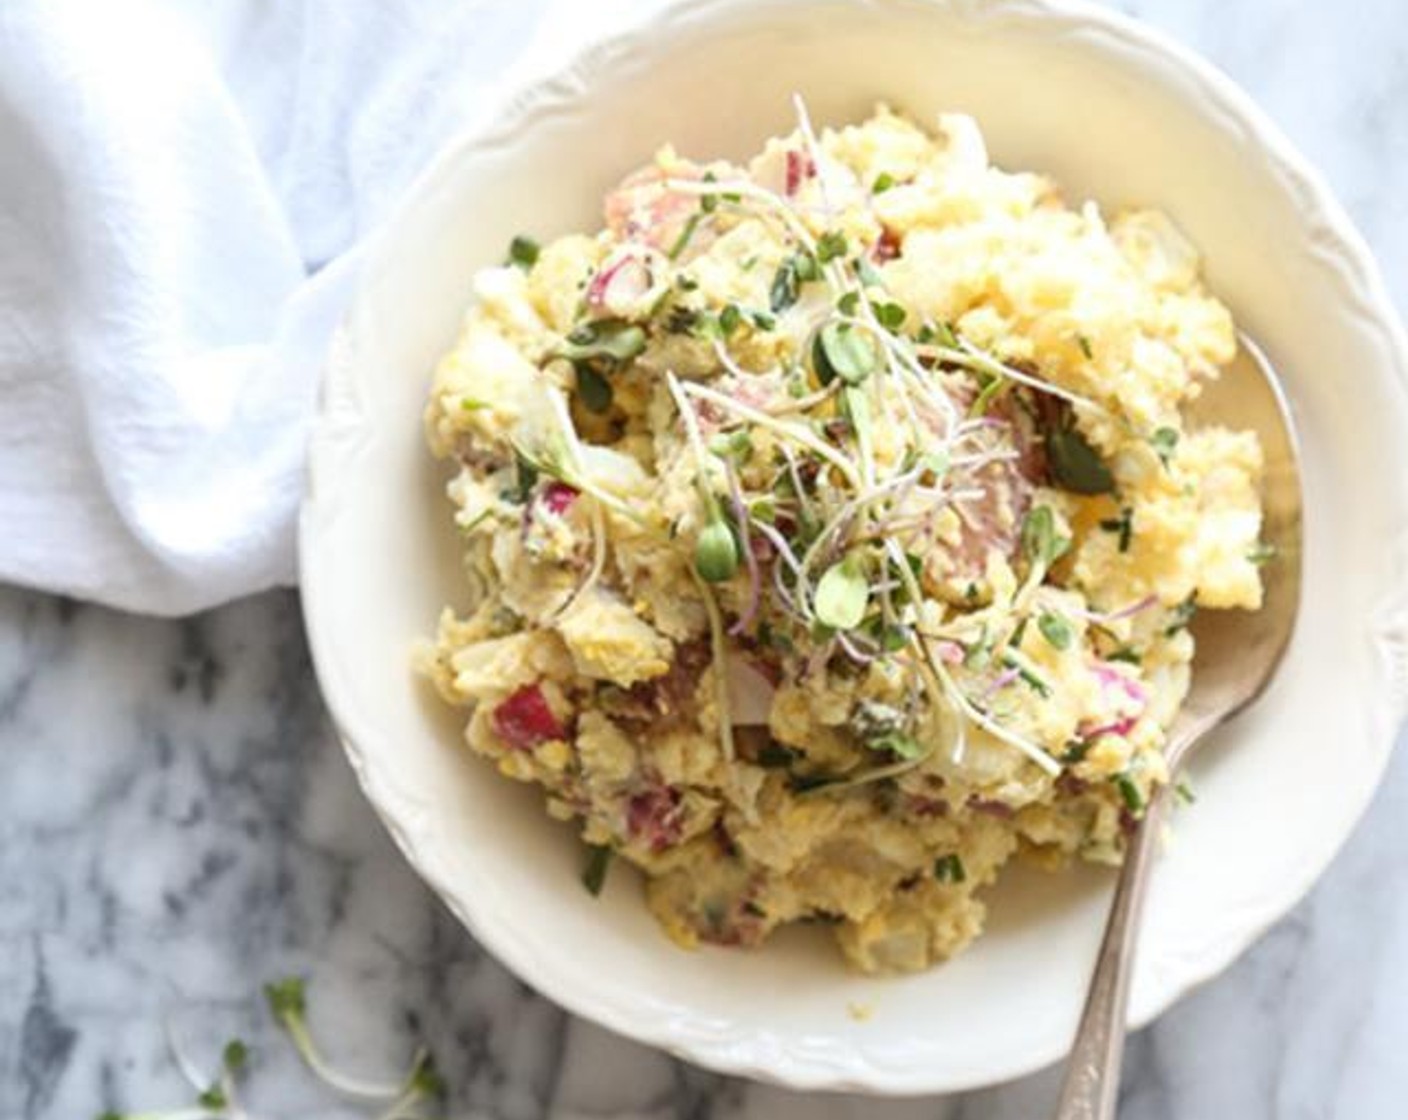 Red Potato Salad with Radishes, Capers and Chives